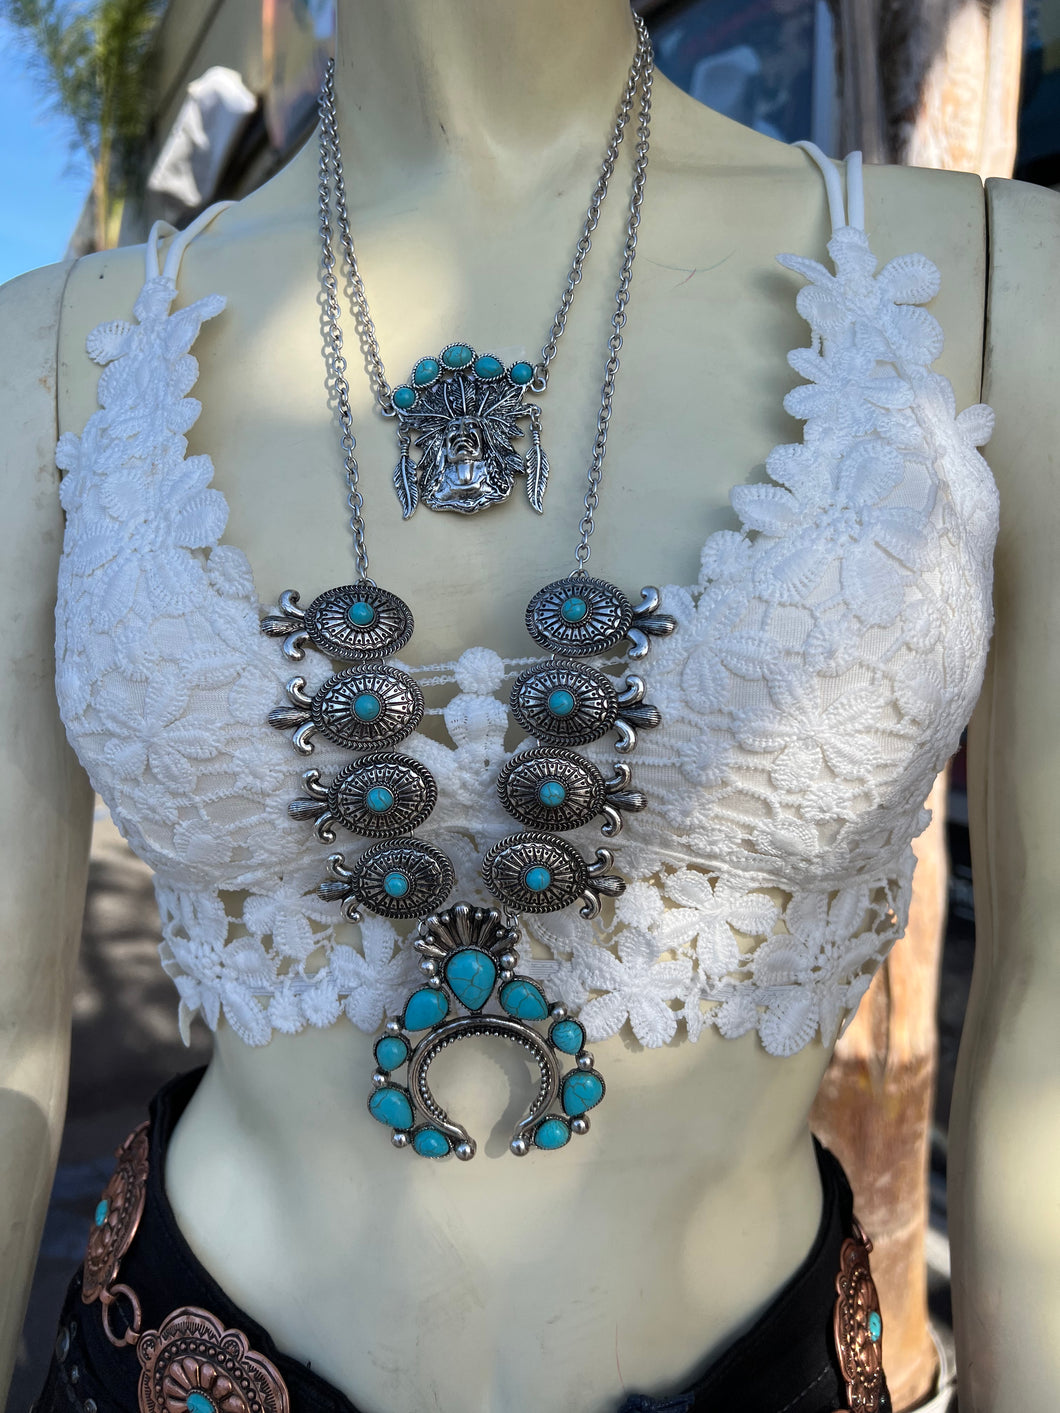 Blanquita Necklace and Earrings set